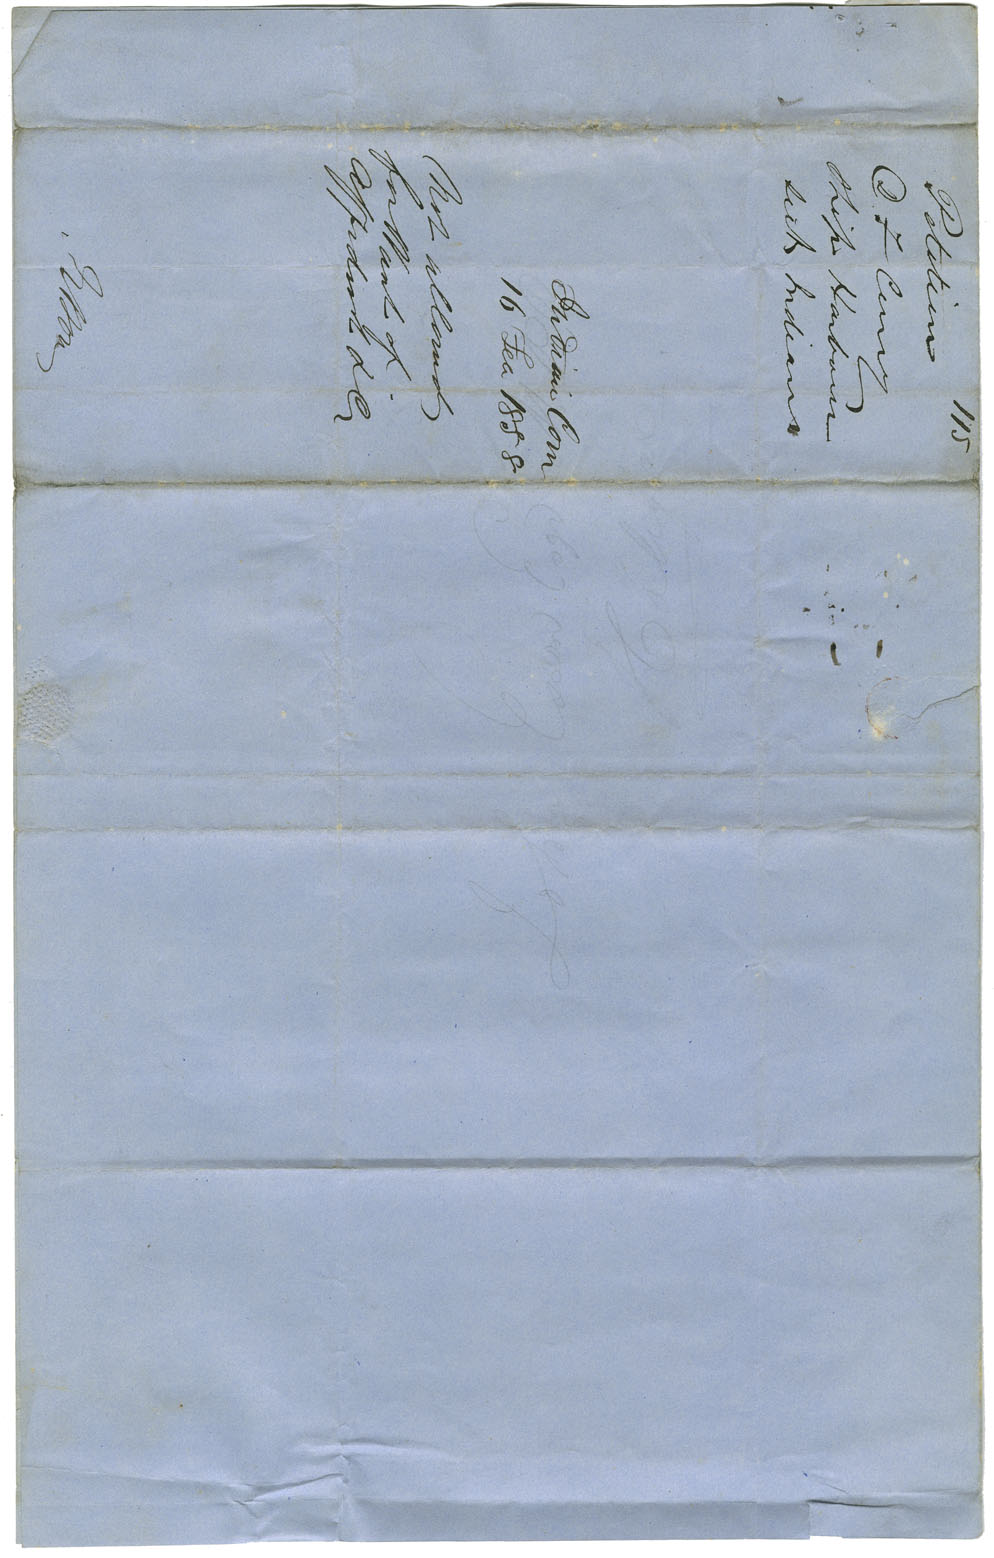 Petition of D.F. Curry, Ship Harbour, requesting reimbursement for aid given to Mi'kmaq.